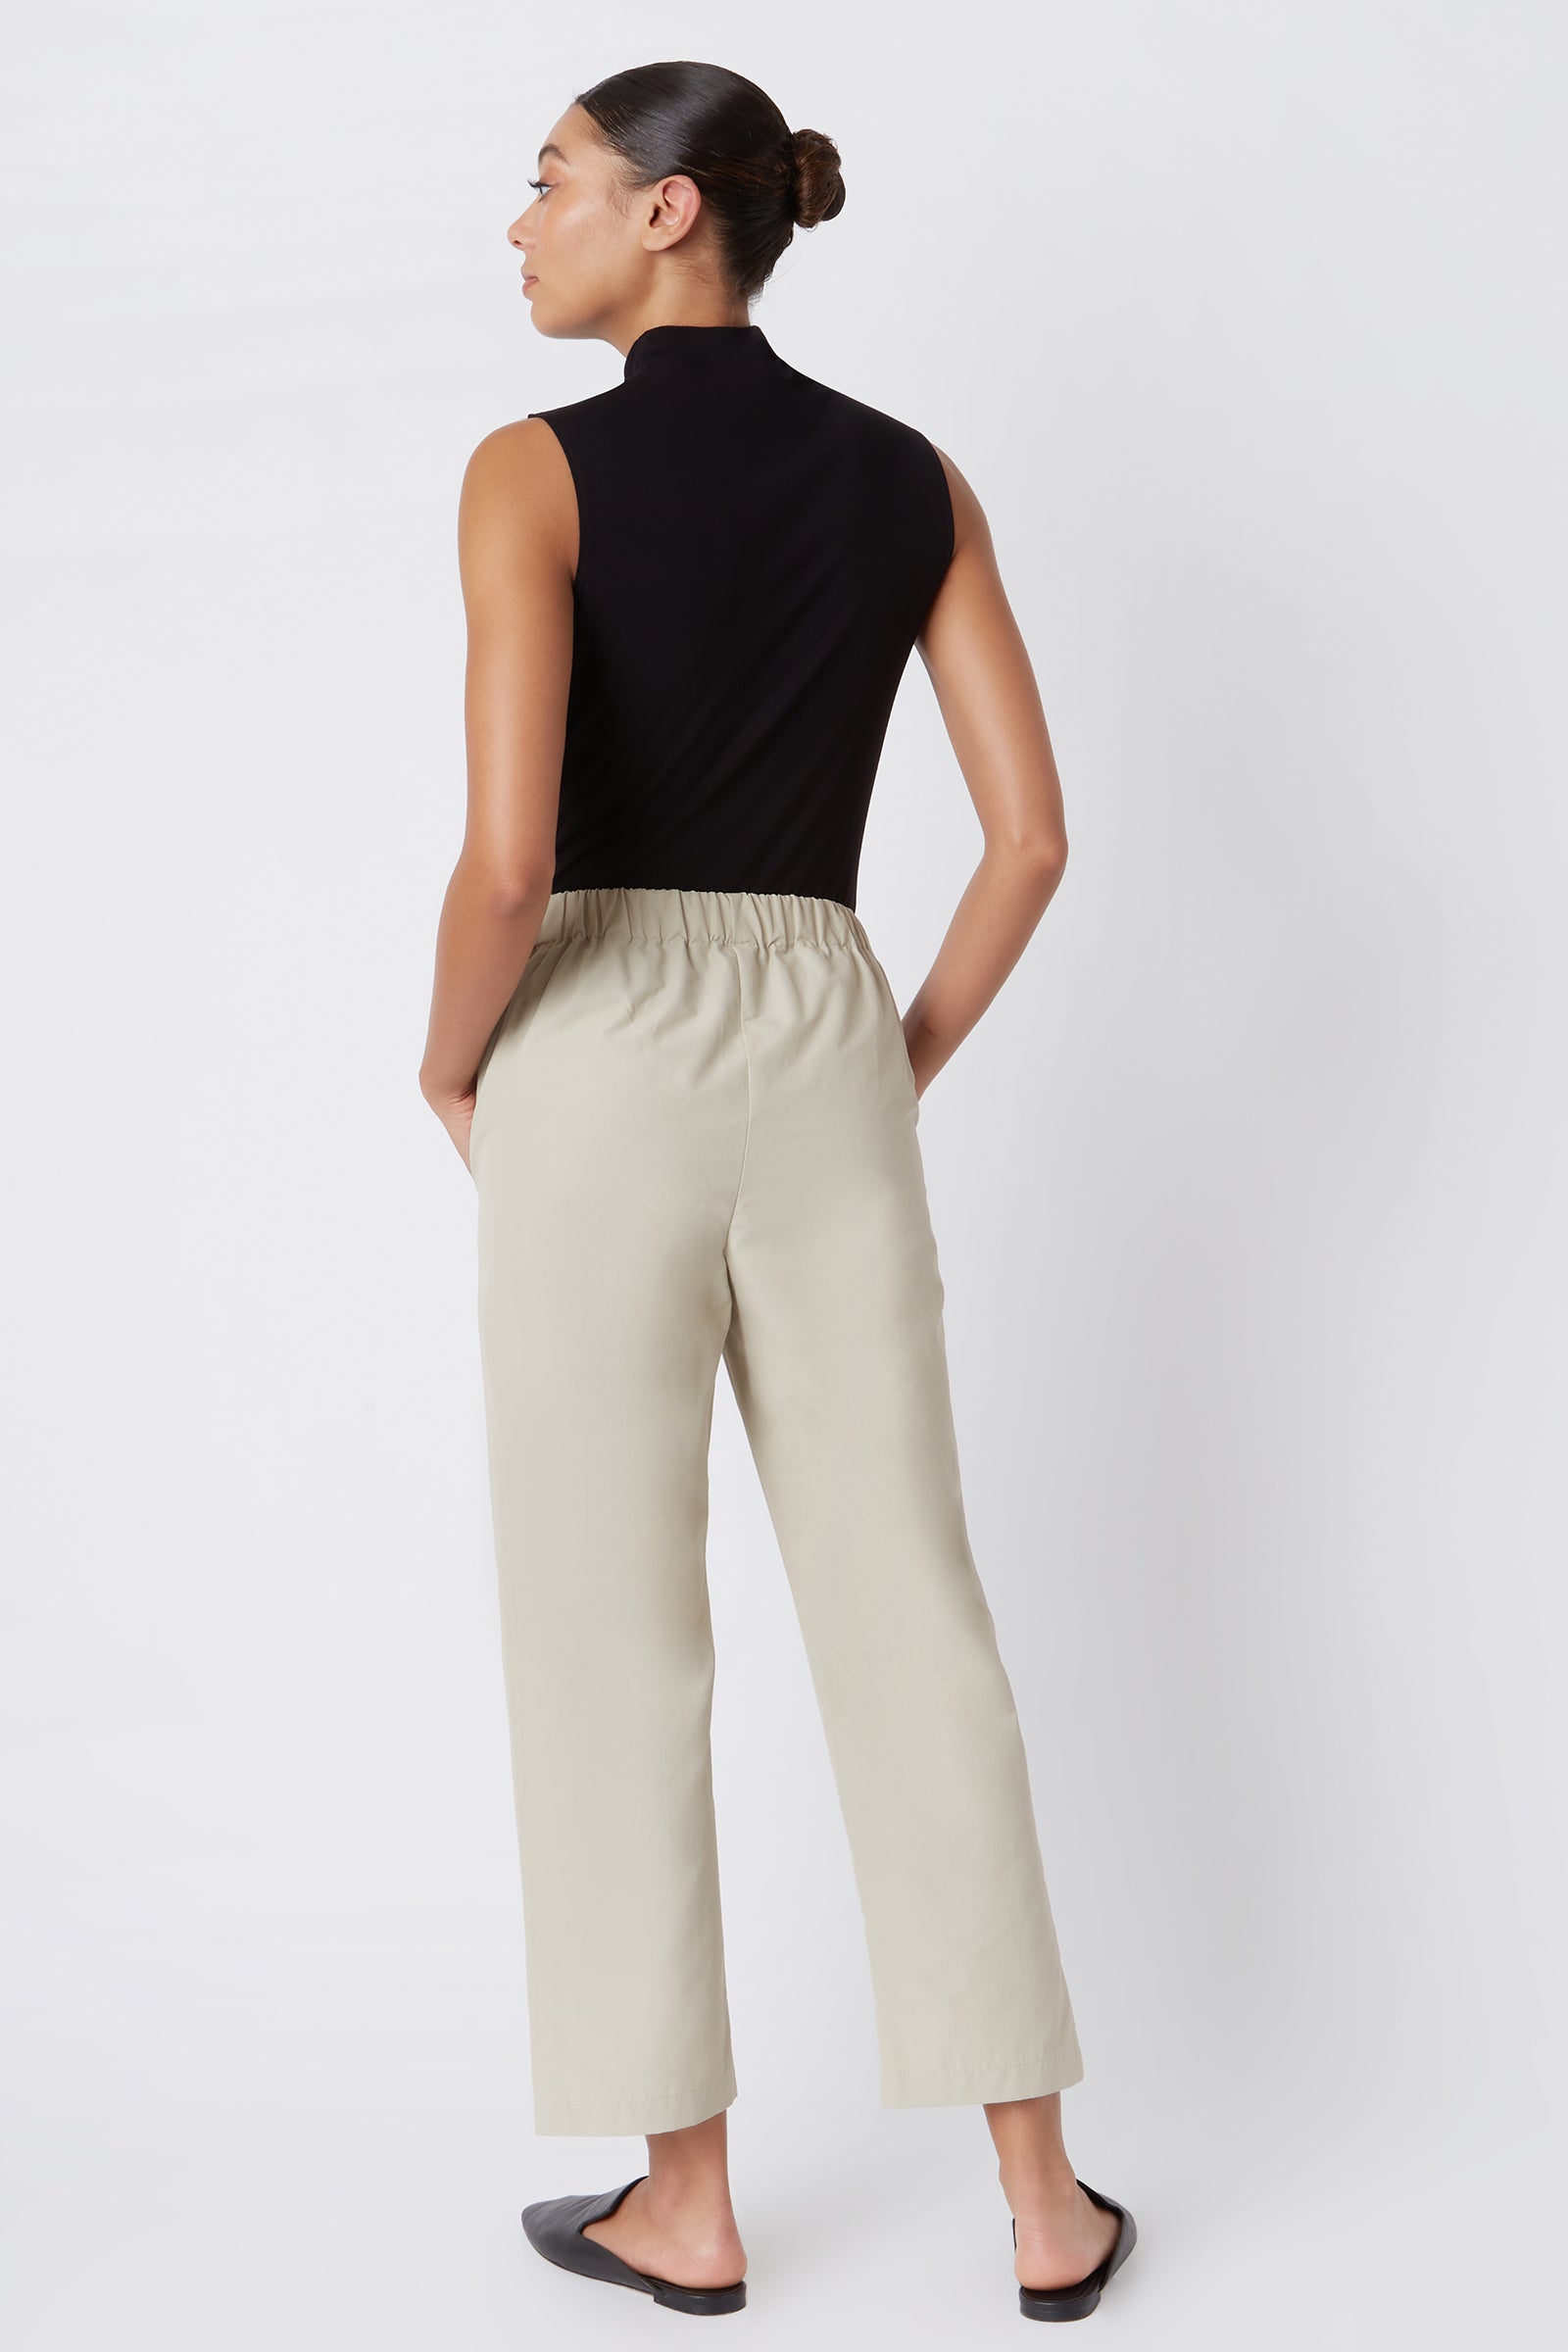 Kal Rieman Brit Crop Pant in Classic Khaki on Model with Hand in Pocket Full Front View